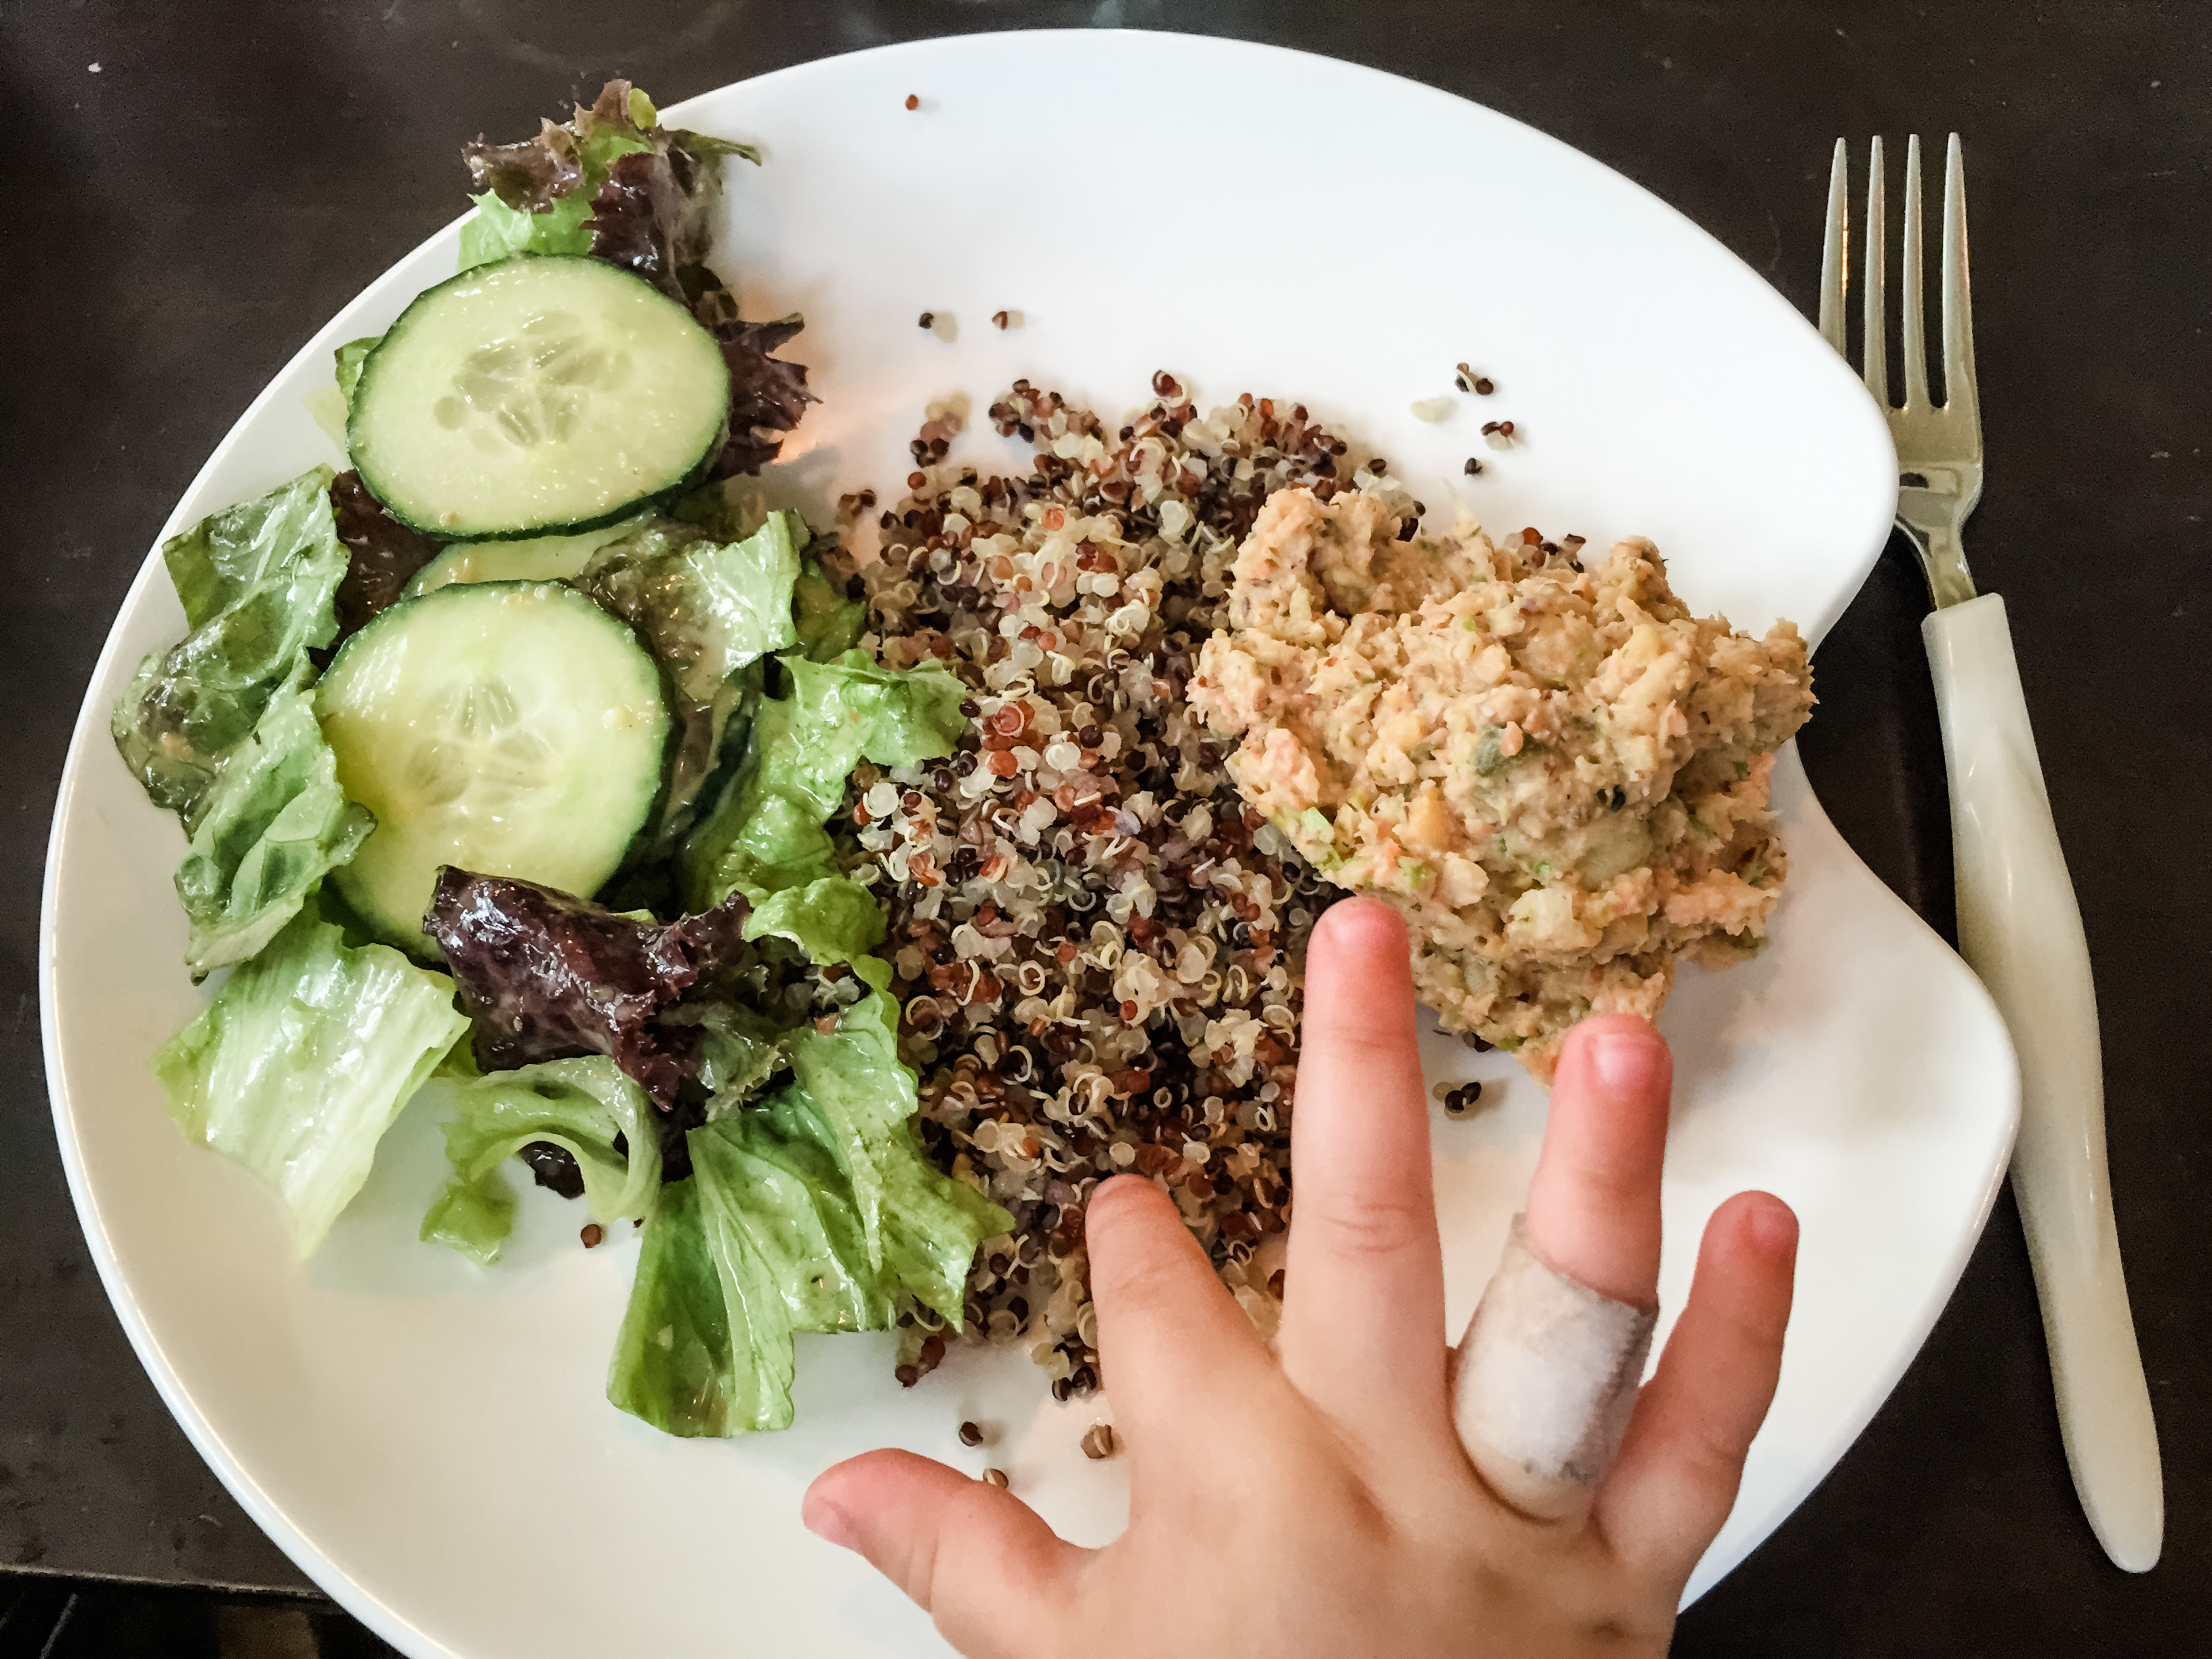 Vegan meal for baby: quinoa, chickpea salad, and garden salad